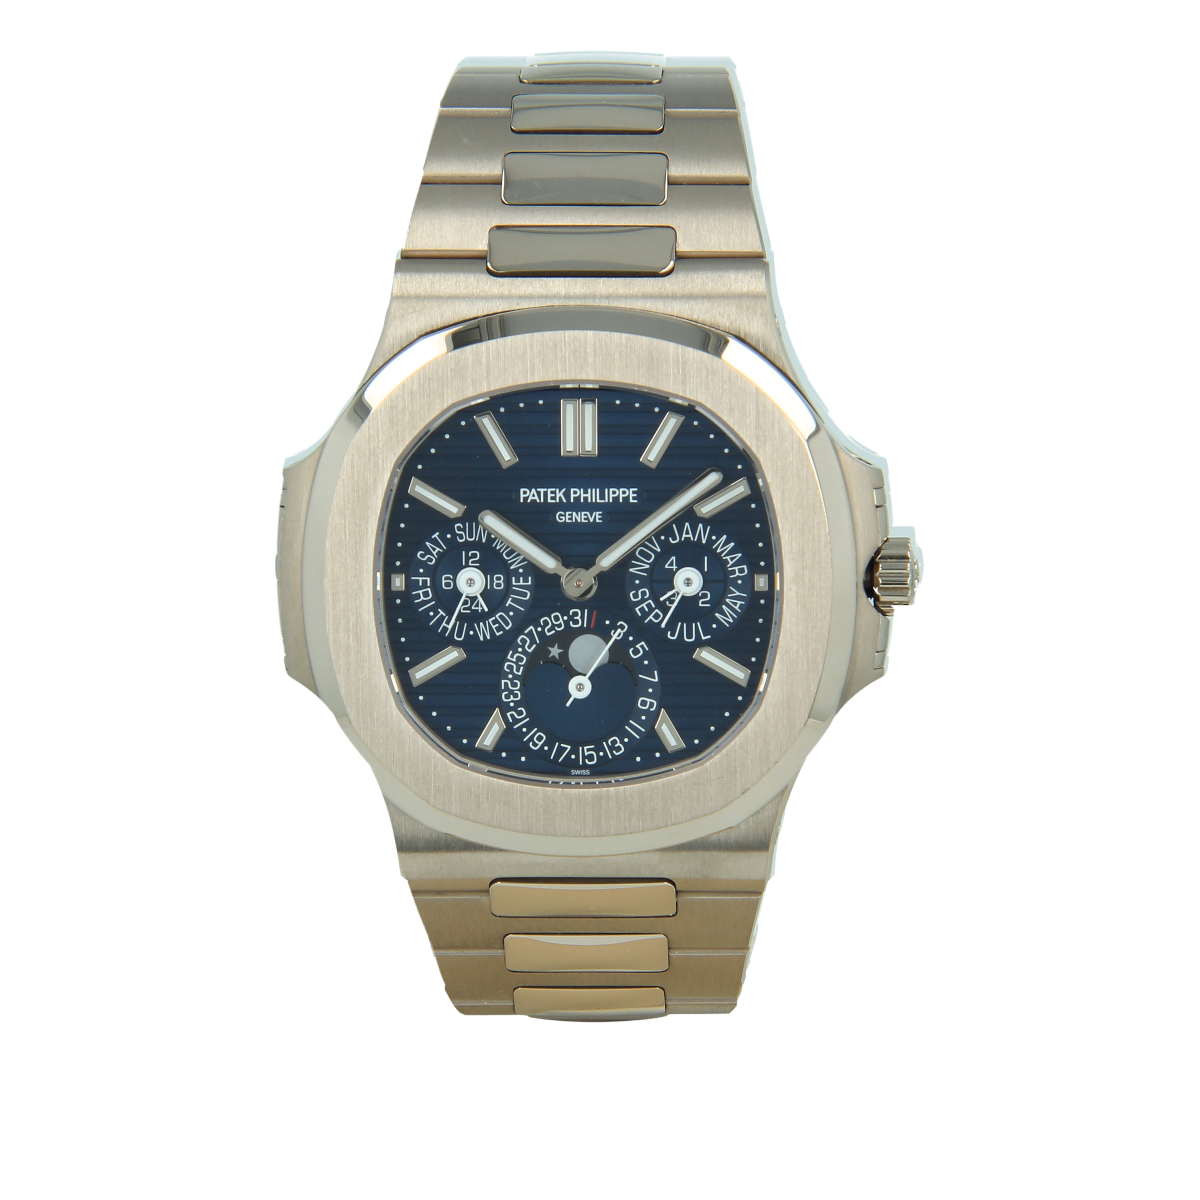 Patek Philippe Nautilus Perpetual Calendar 5740/1G-001 Blue Dial for  $235,000 for sale from a Seller on Chrono24